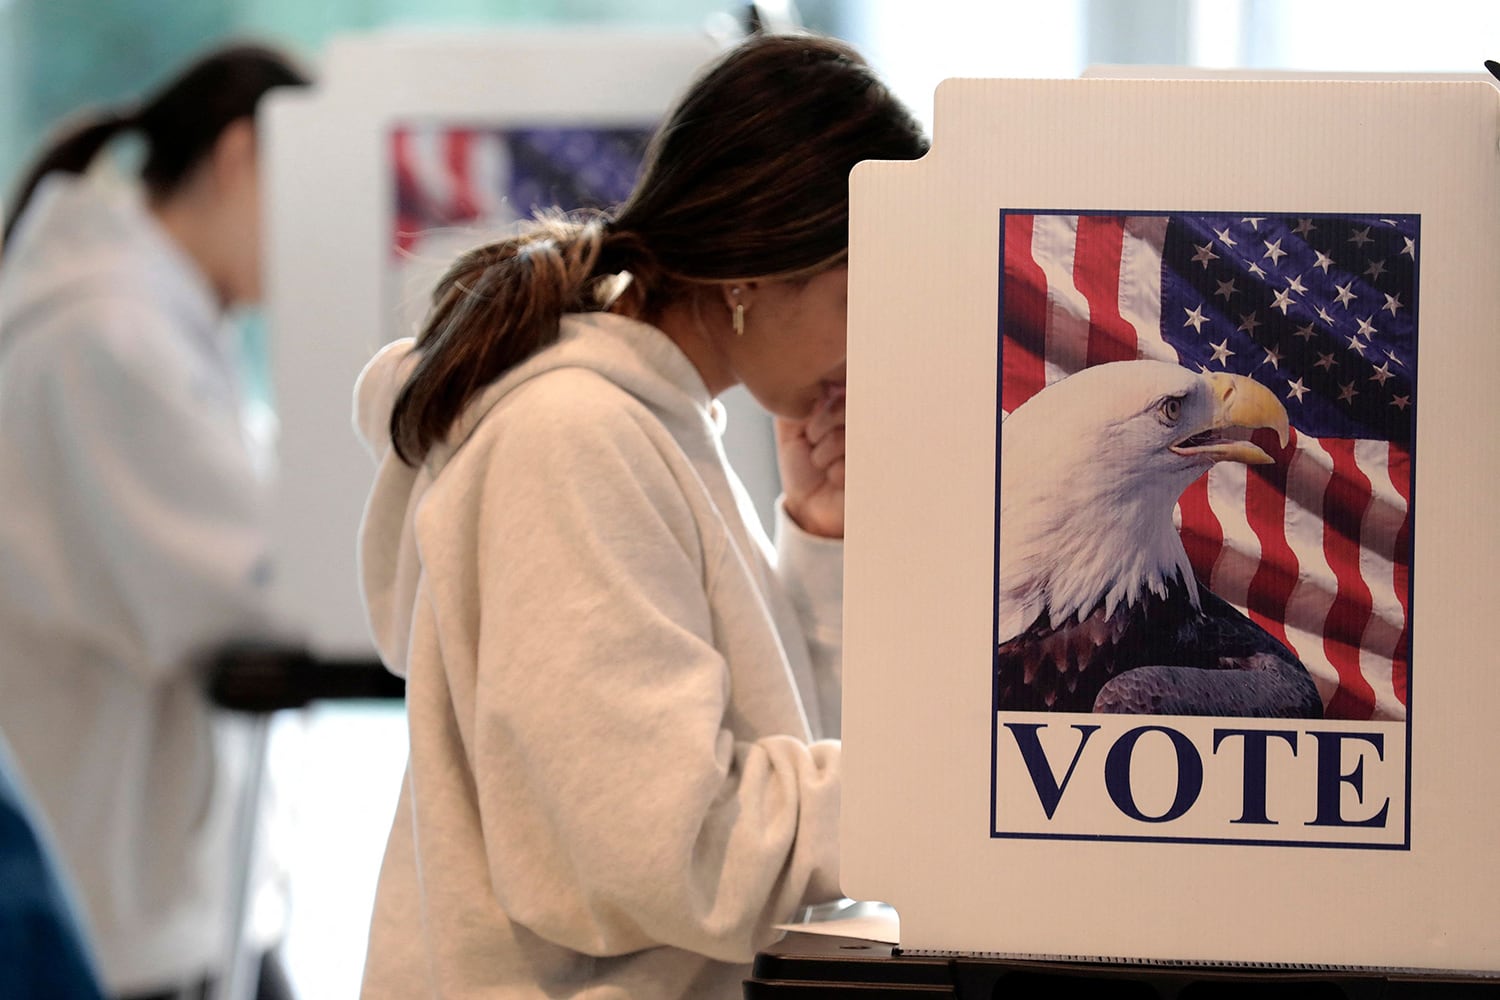 A young person with long brown hair and wearing a white sweater is voting inside of a voting cubicle with an American flag and an eagle with the word "VOTE," on the side.